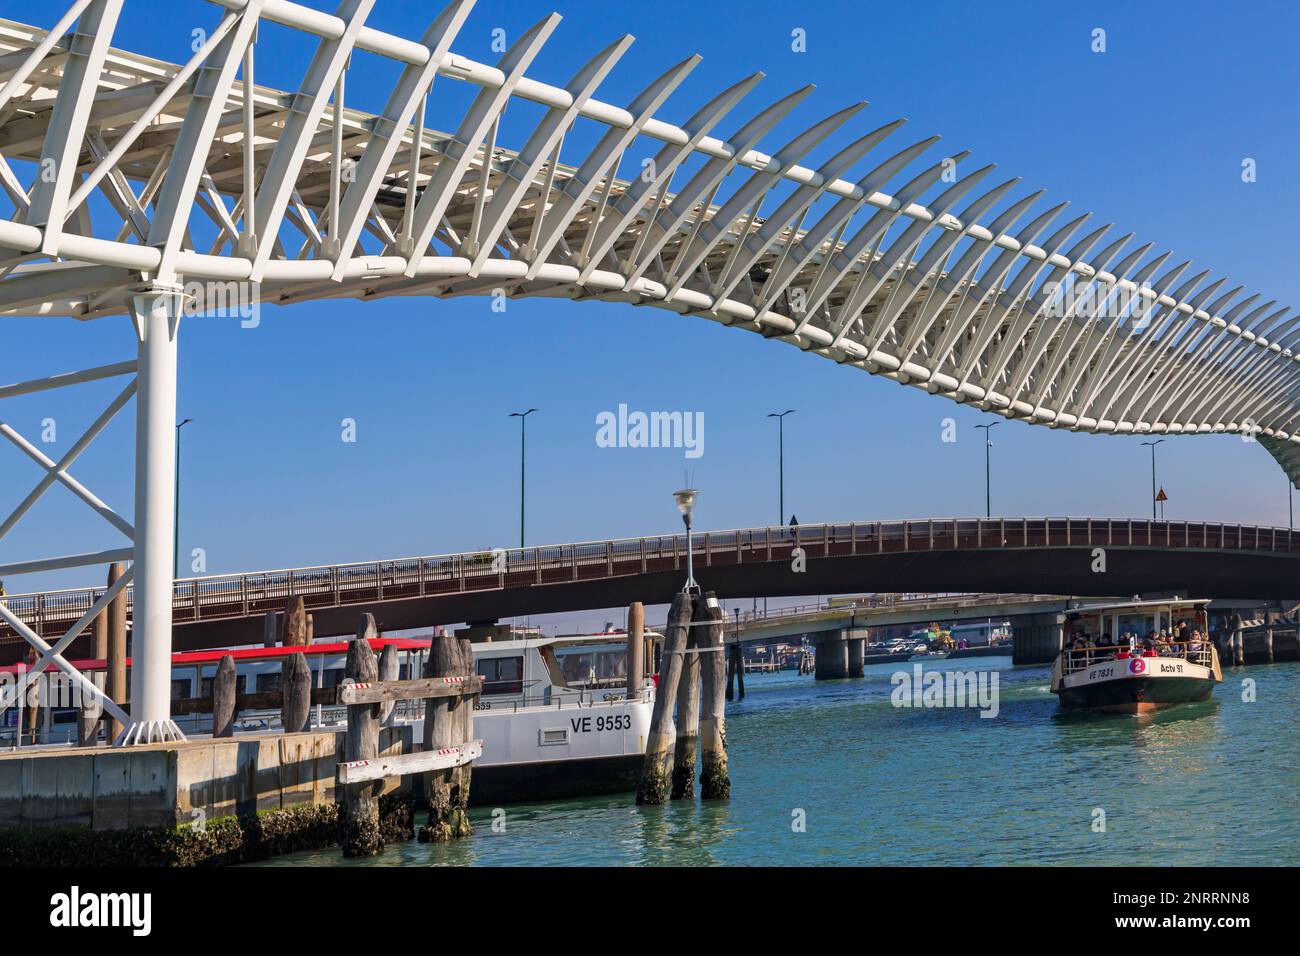 modern monorail elevated railway track of the Venice People Mover public transit system between Piazzale Roma and Venice cruise port at Venice, Italy Stock Photo